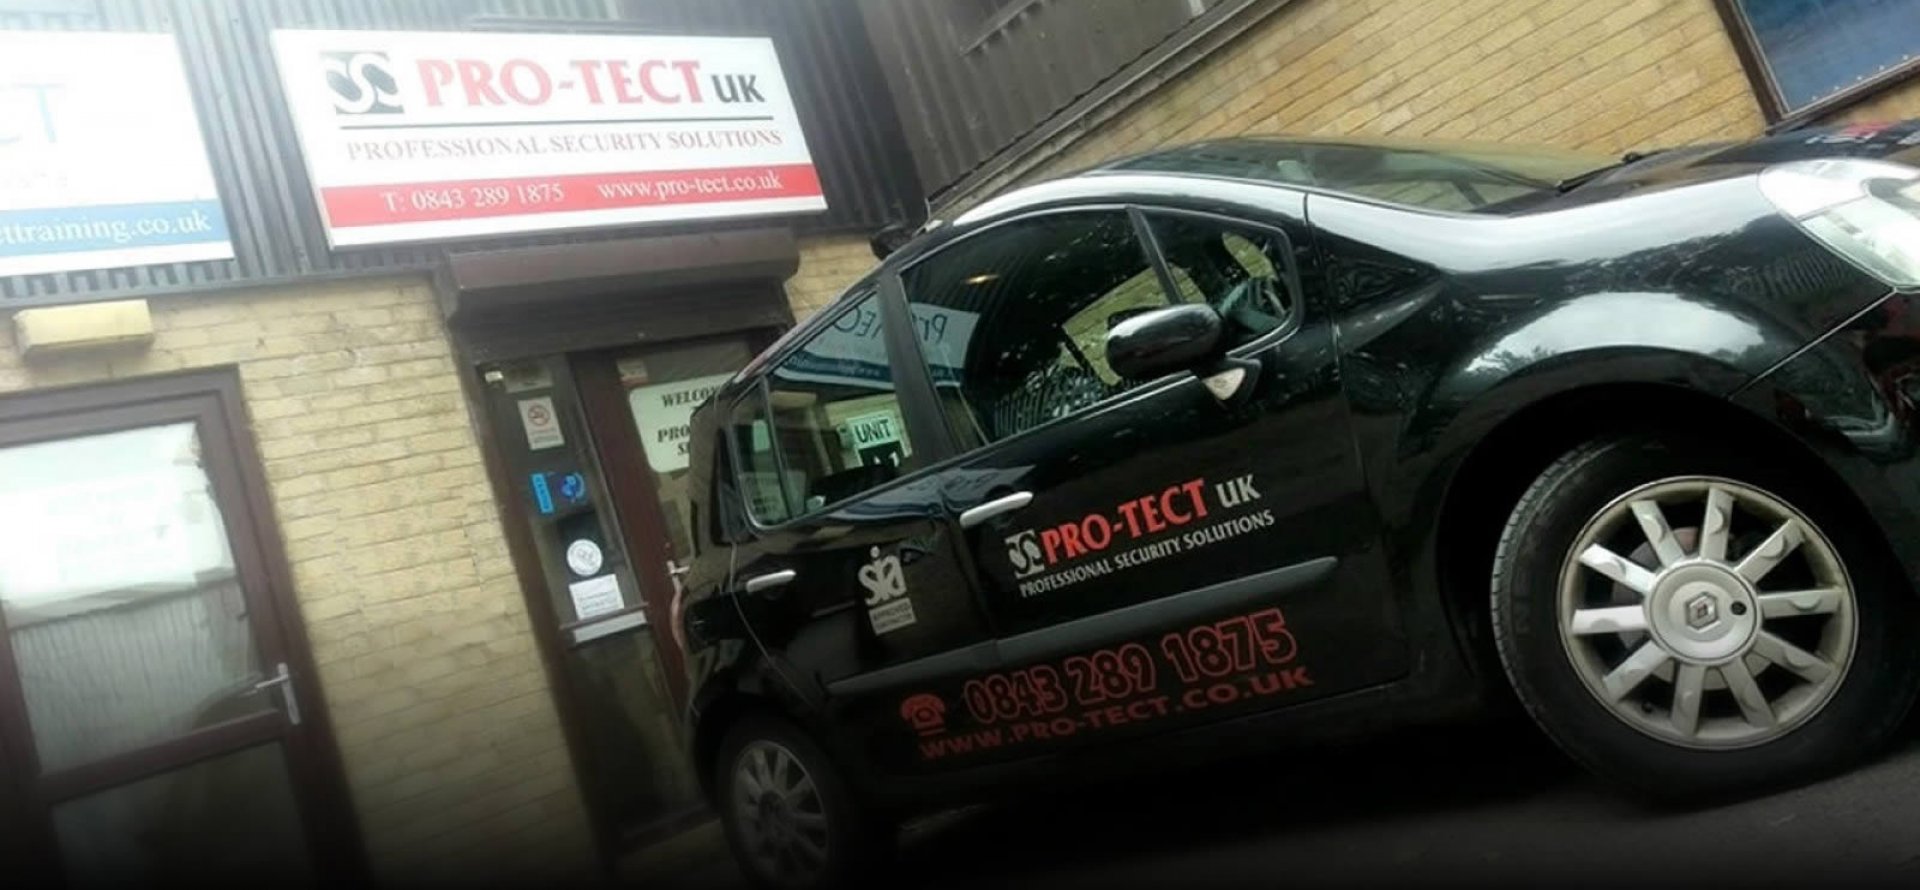 Pro-Tect UK SIA approved security company